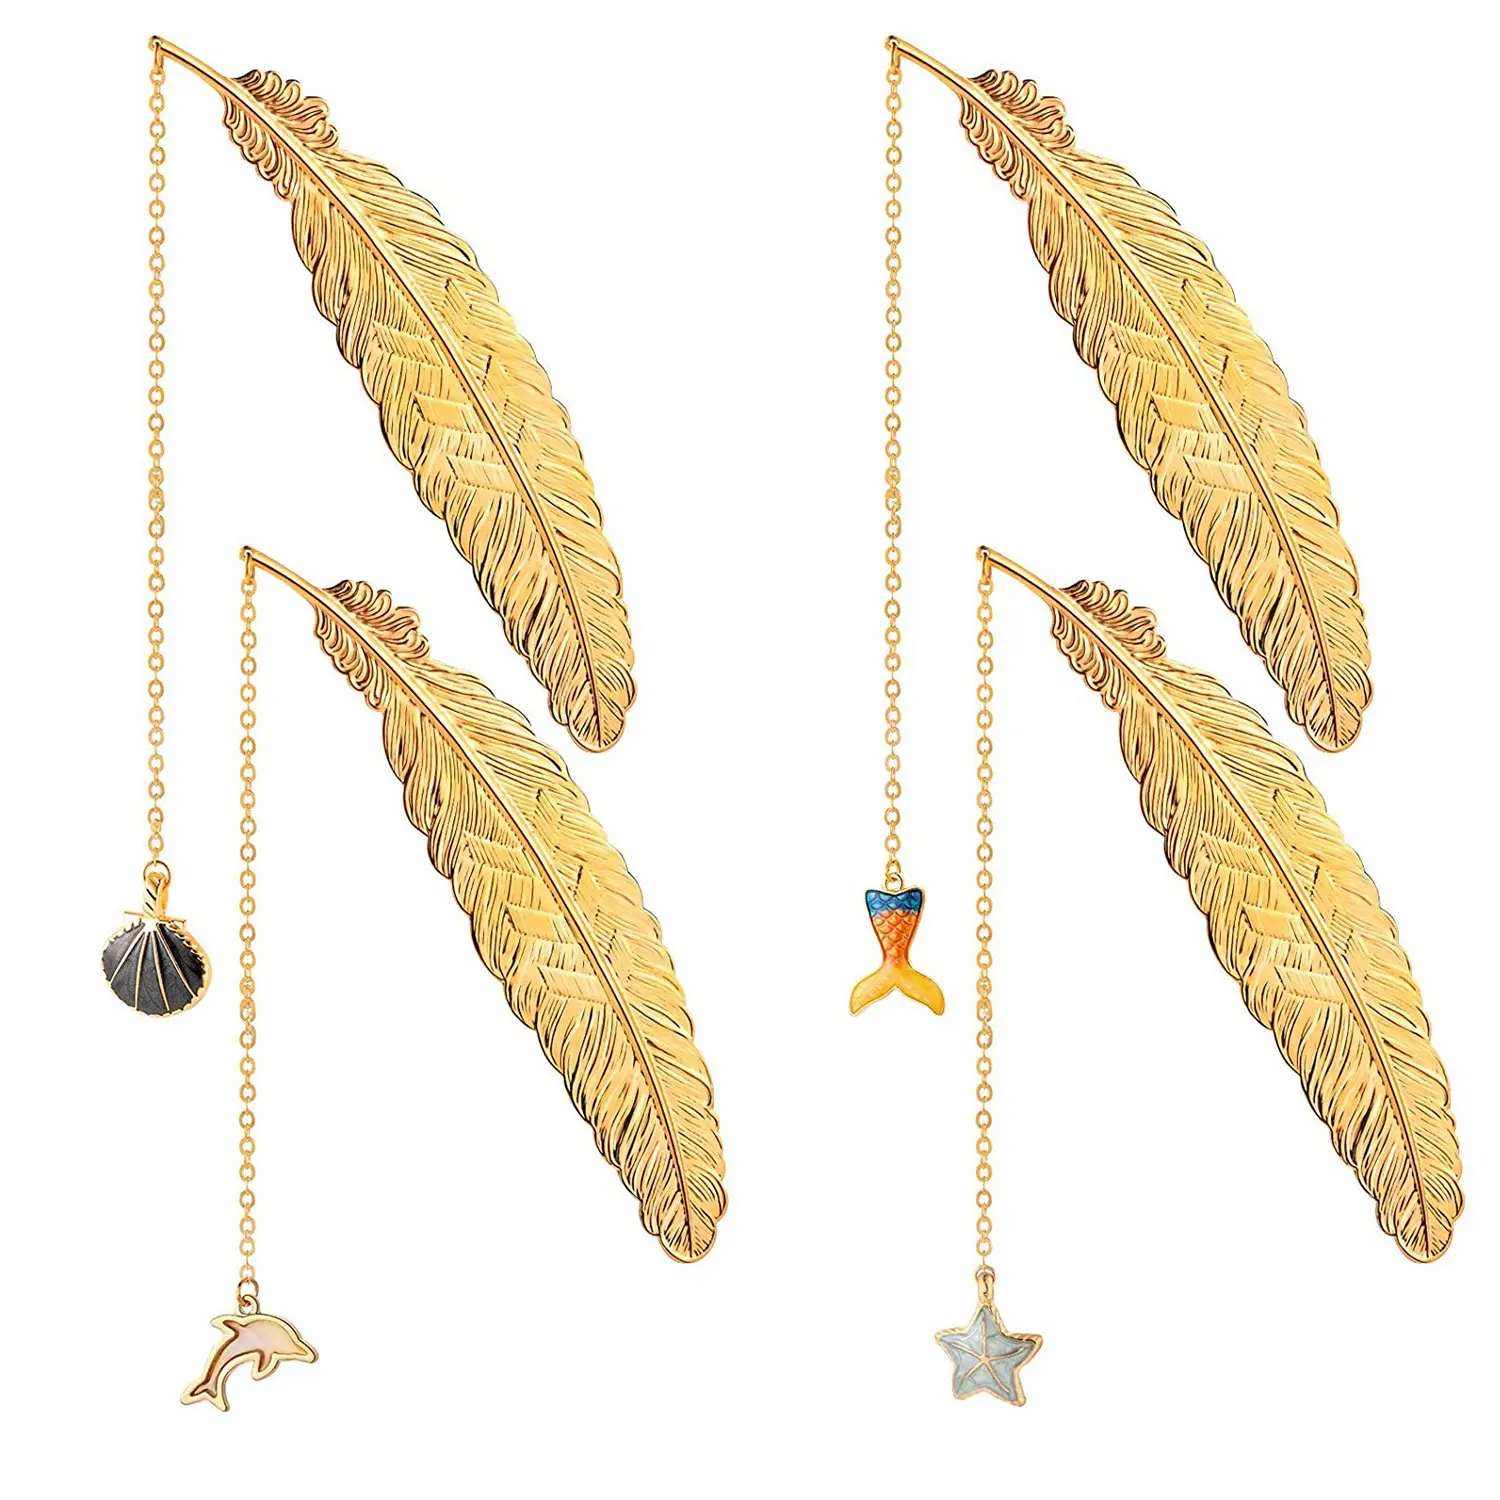 

4 Pieces Feather Pendant Bookmarks Handmade Metal Bookmarks Present for Teens Adults Friends Readers